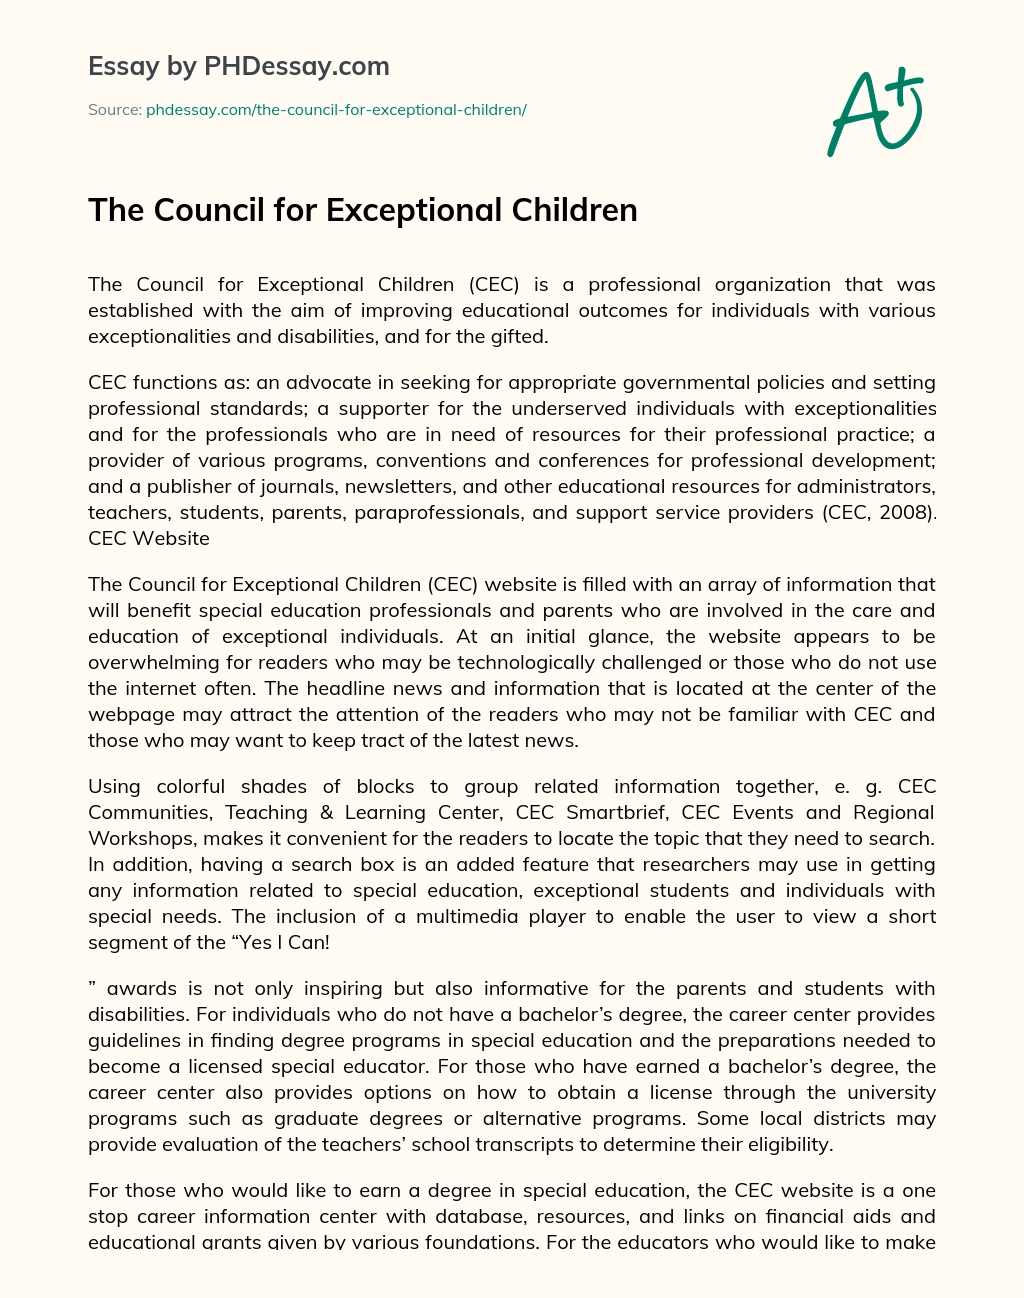 The Council for Exceptional Children essay